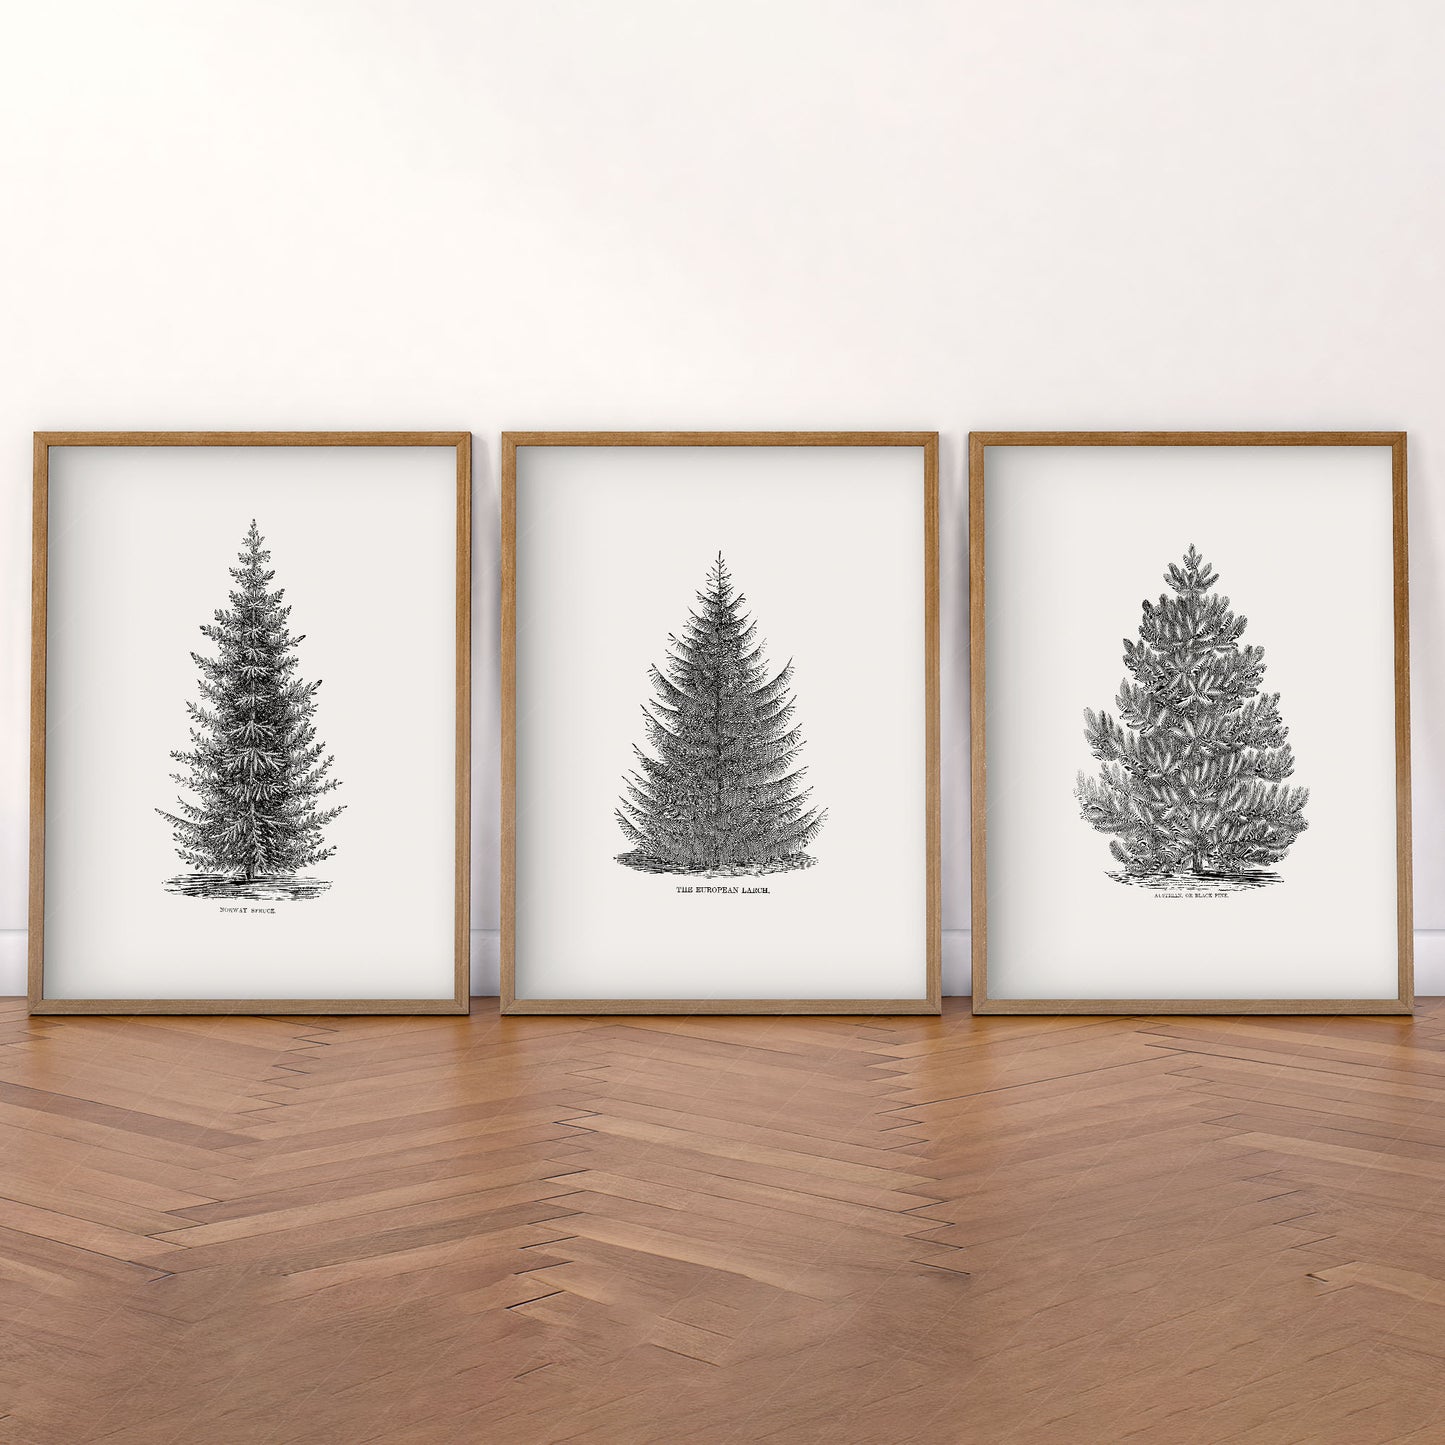 Norway Spruce Trees Wall Art, Set of 3 Prints